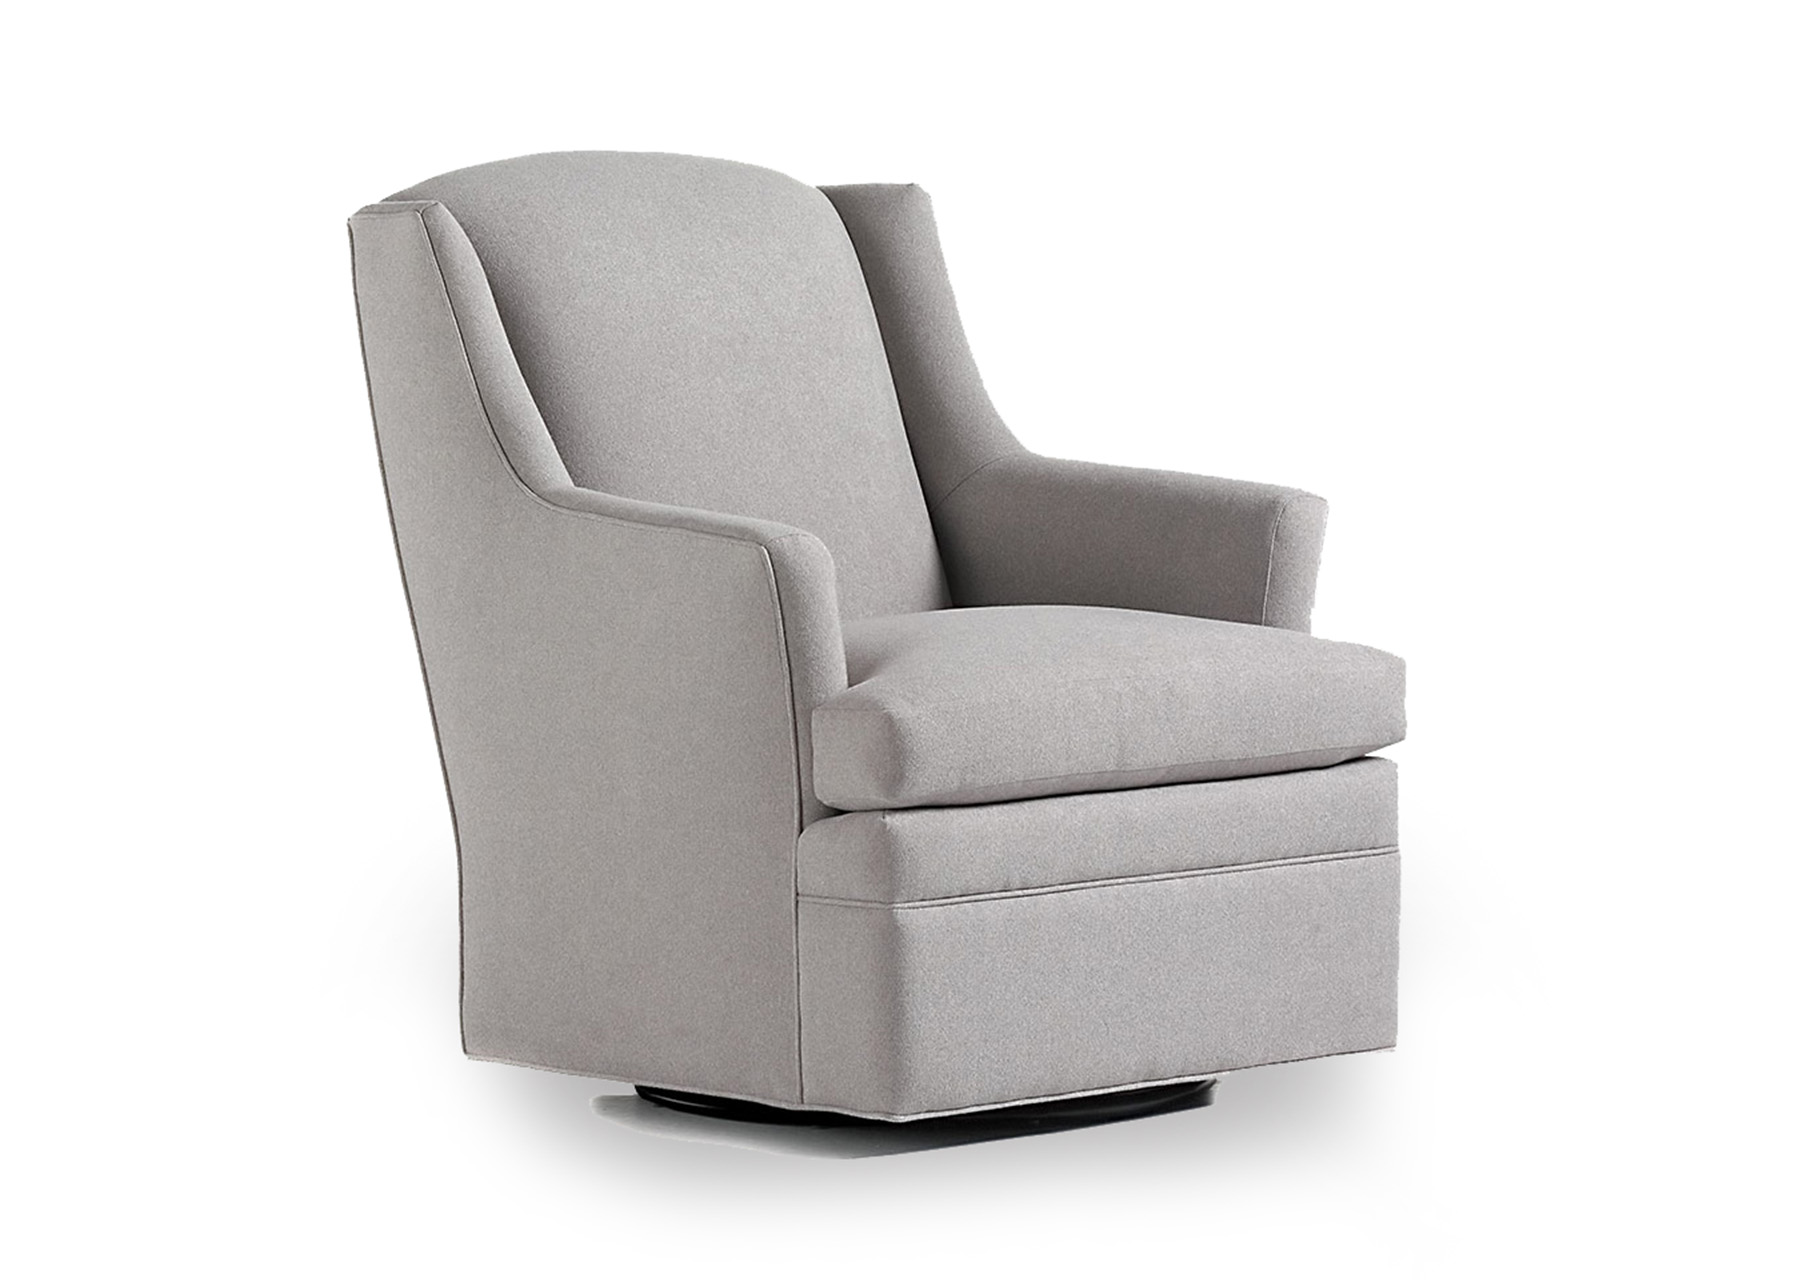 CAGNEY TIGHT BACK SWIVEL CHAIR